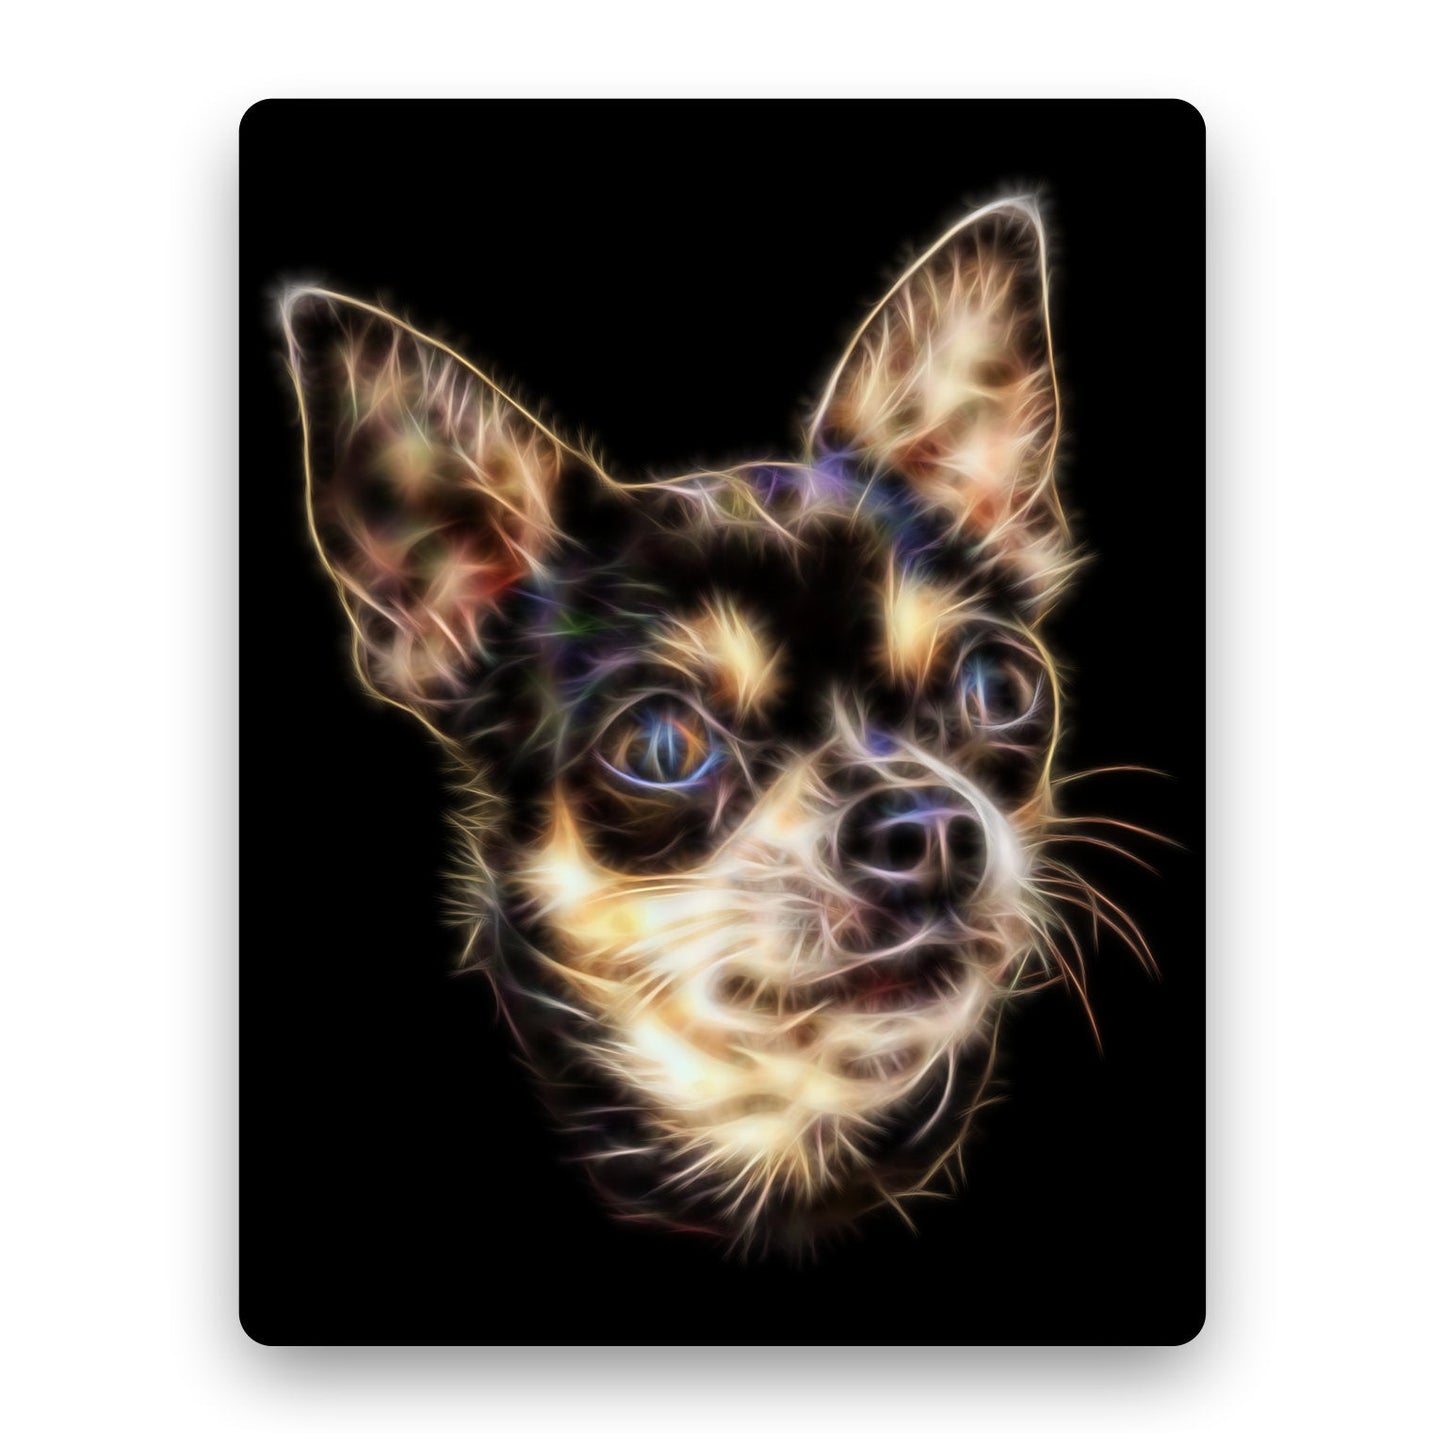 Short Haired Chocolate and Tan Chihuahua Metal Wall Plaque with Fractal Art Design.